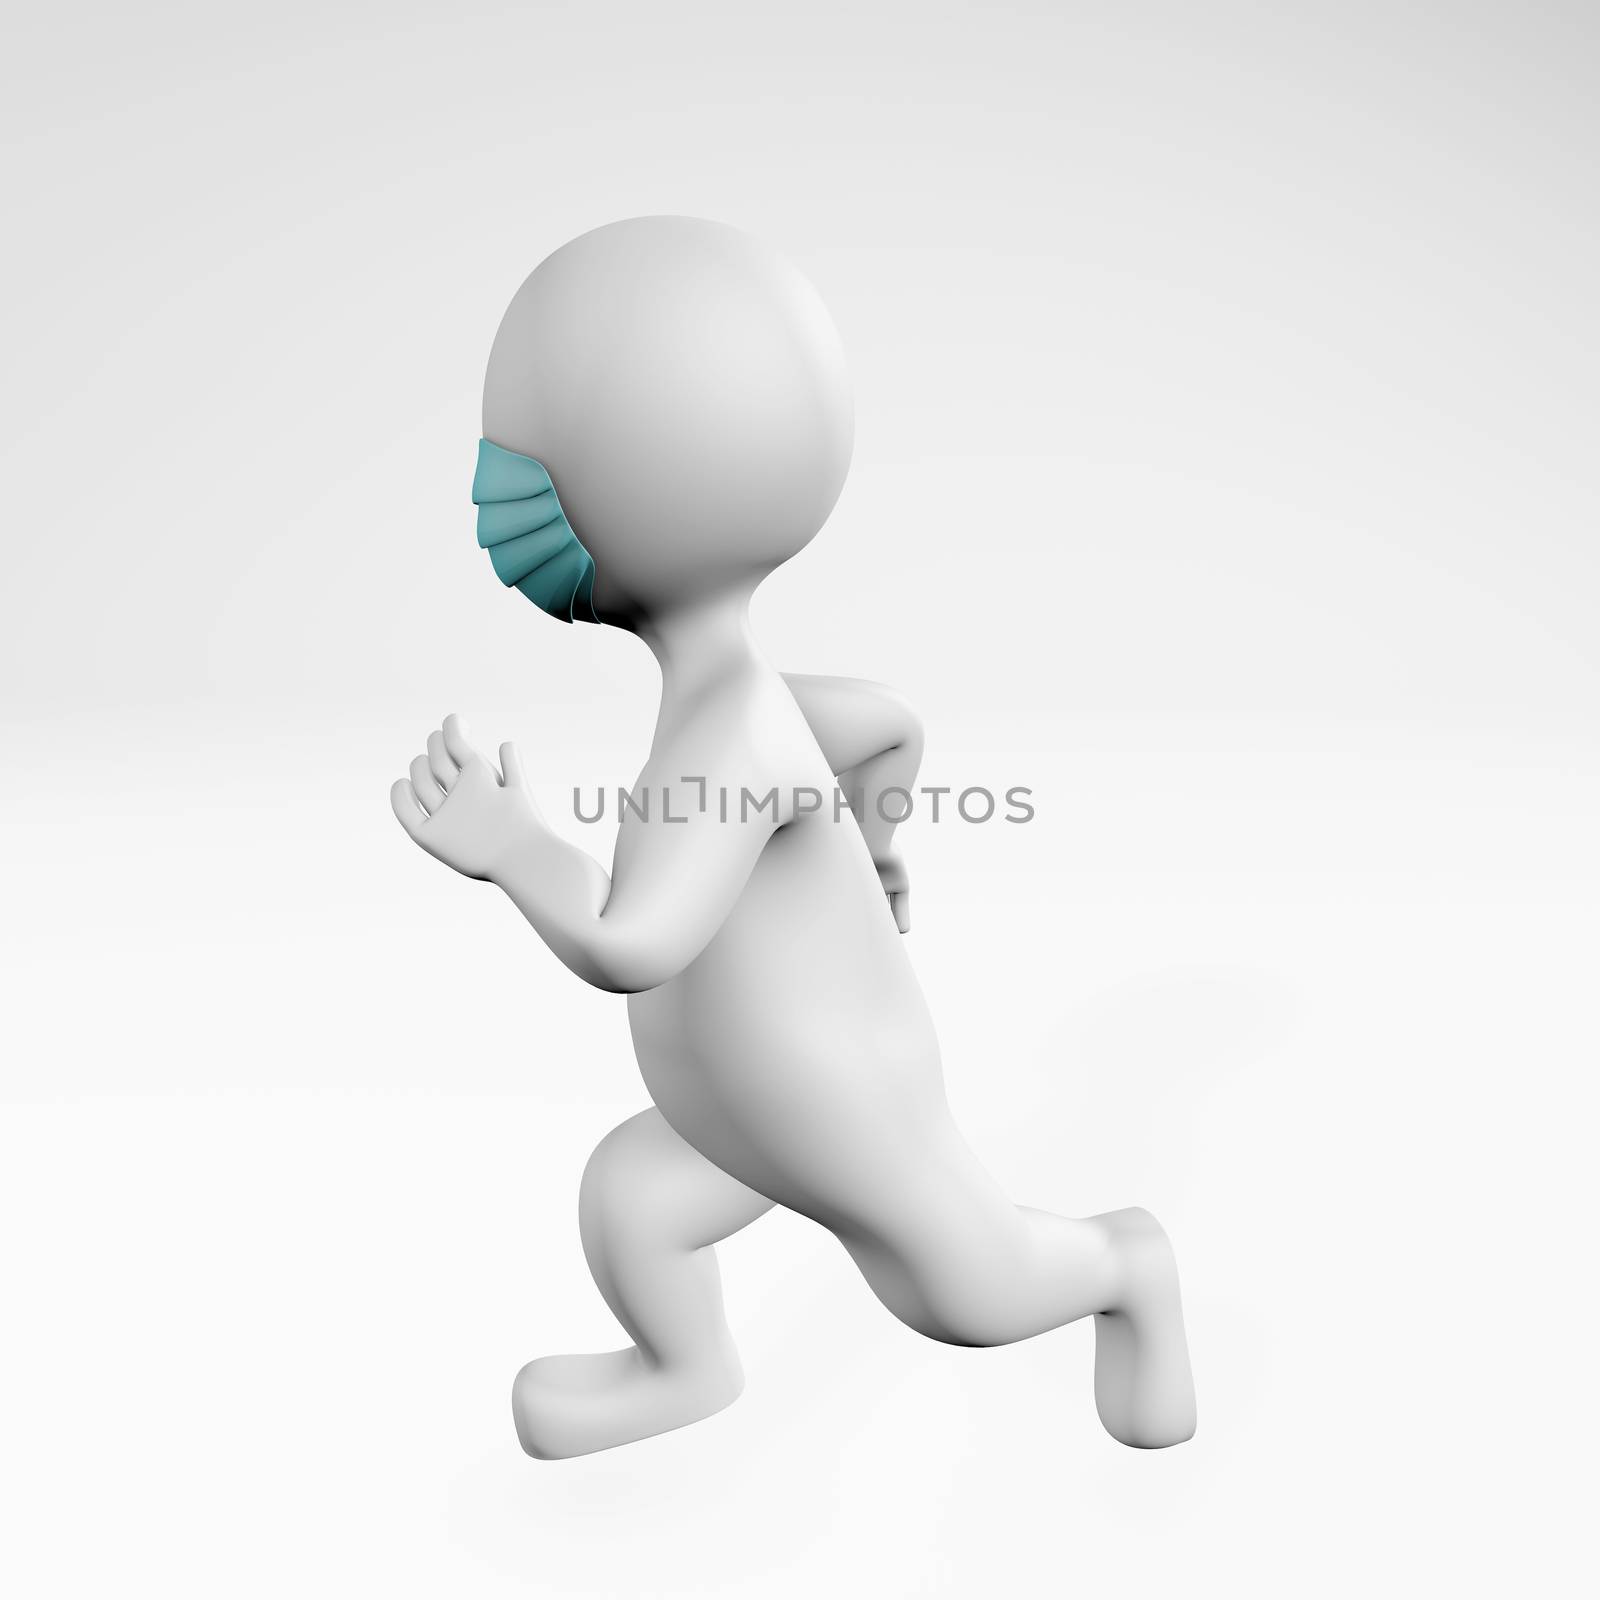 man with mask running sport 3d rendering by F1b0nacci